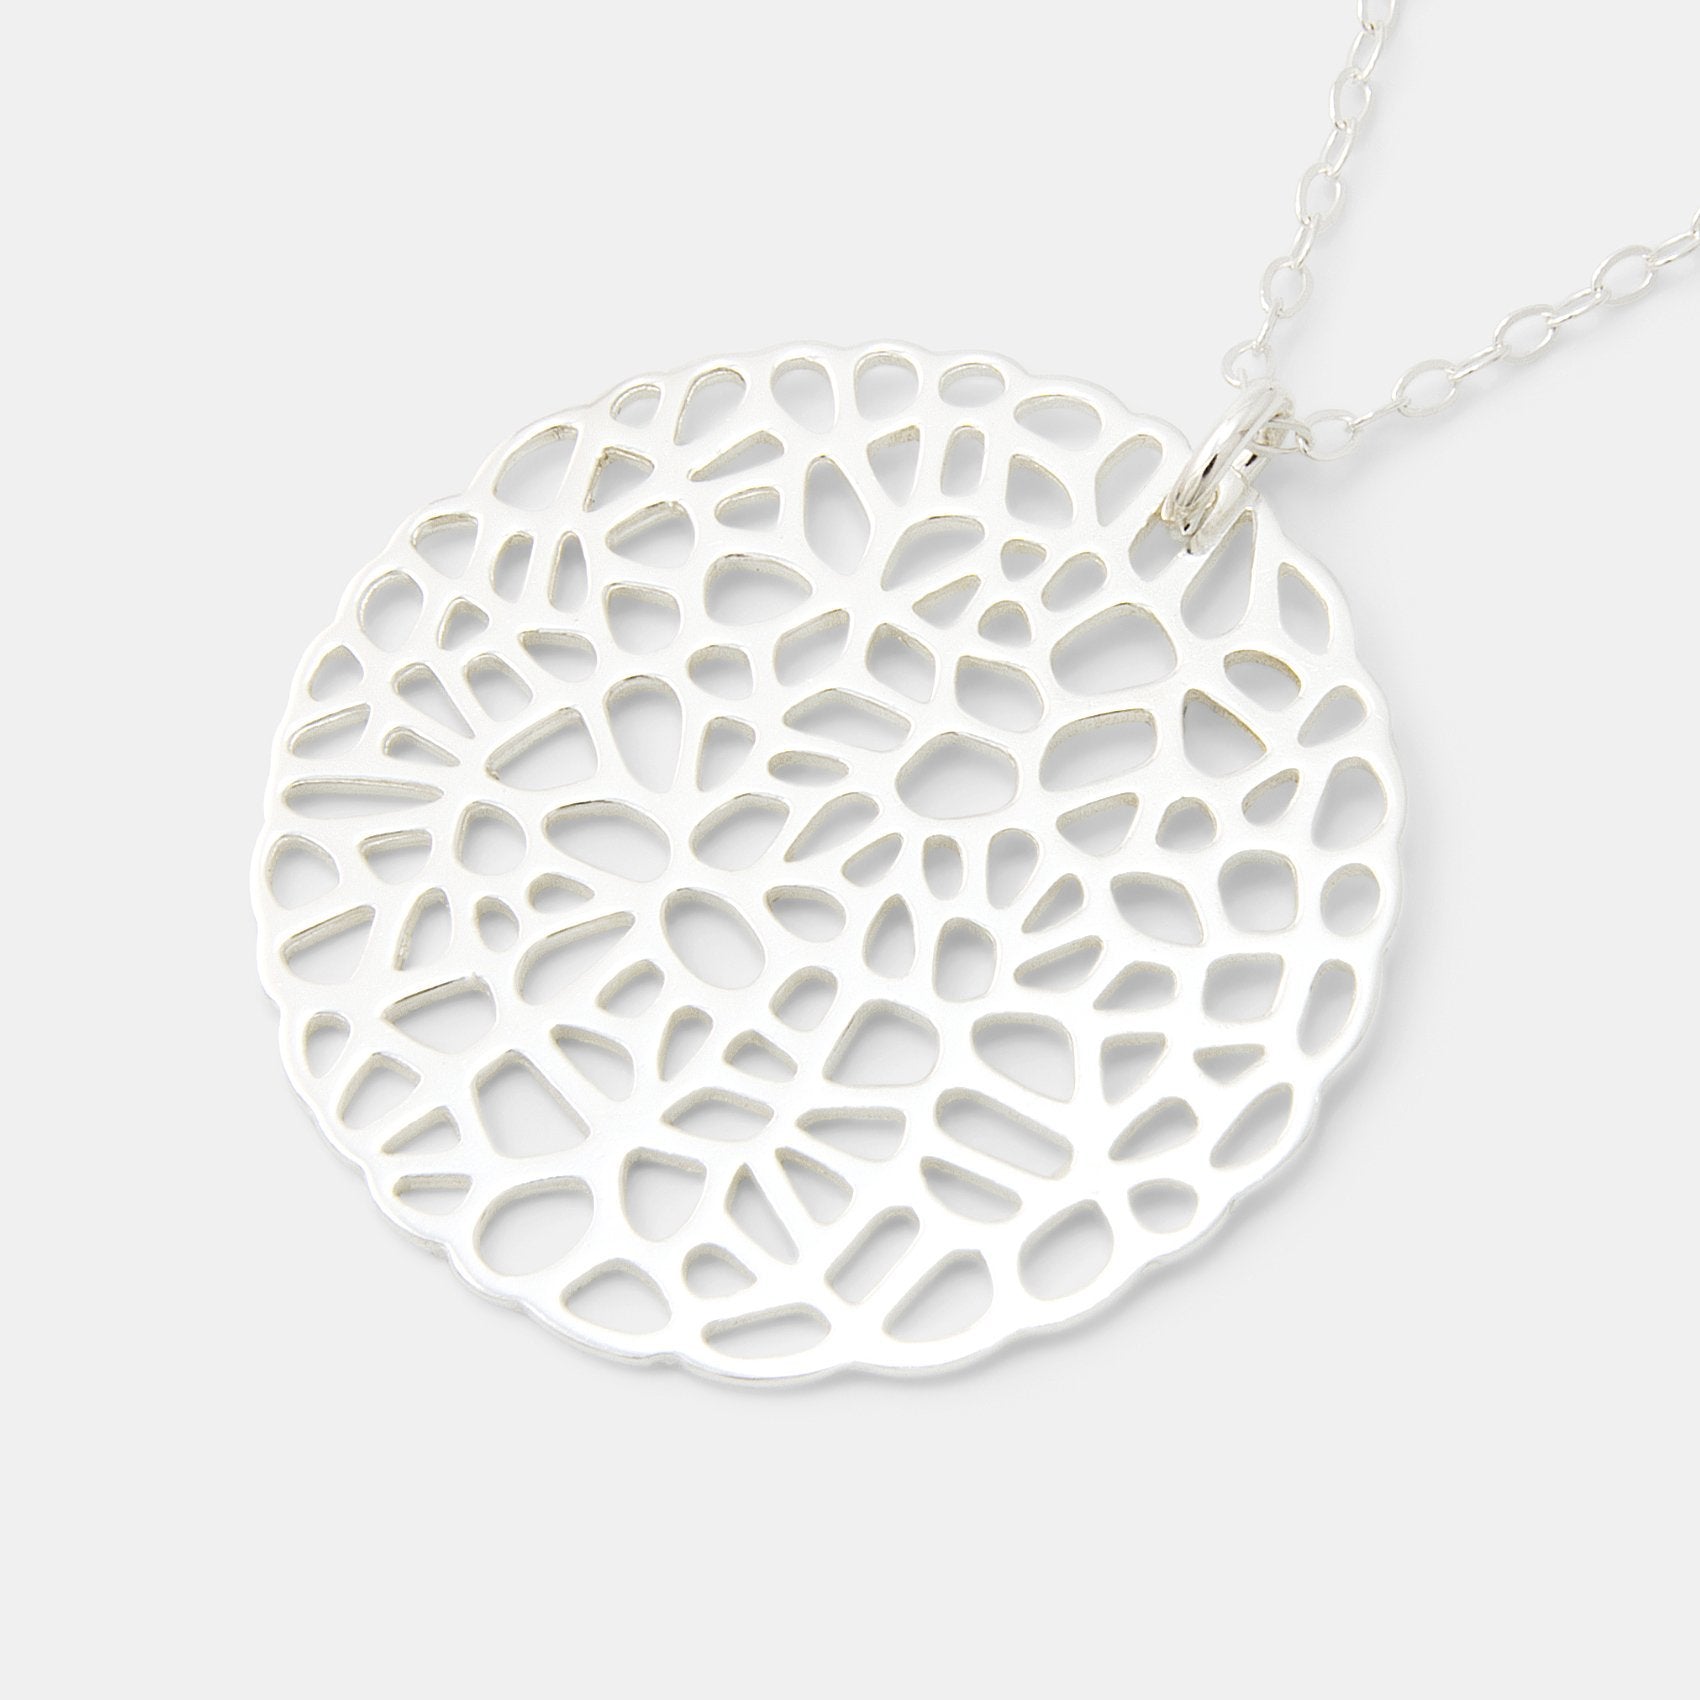 Coral silver pendant necklace (large) - Simone Walsh Jewellery Australia